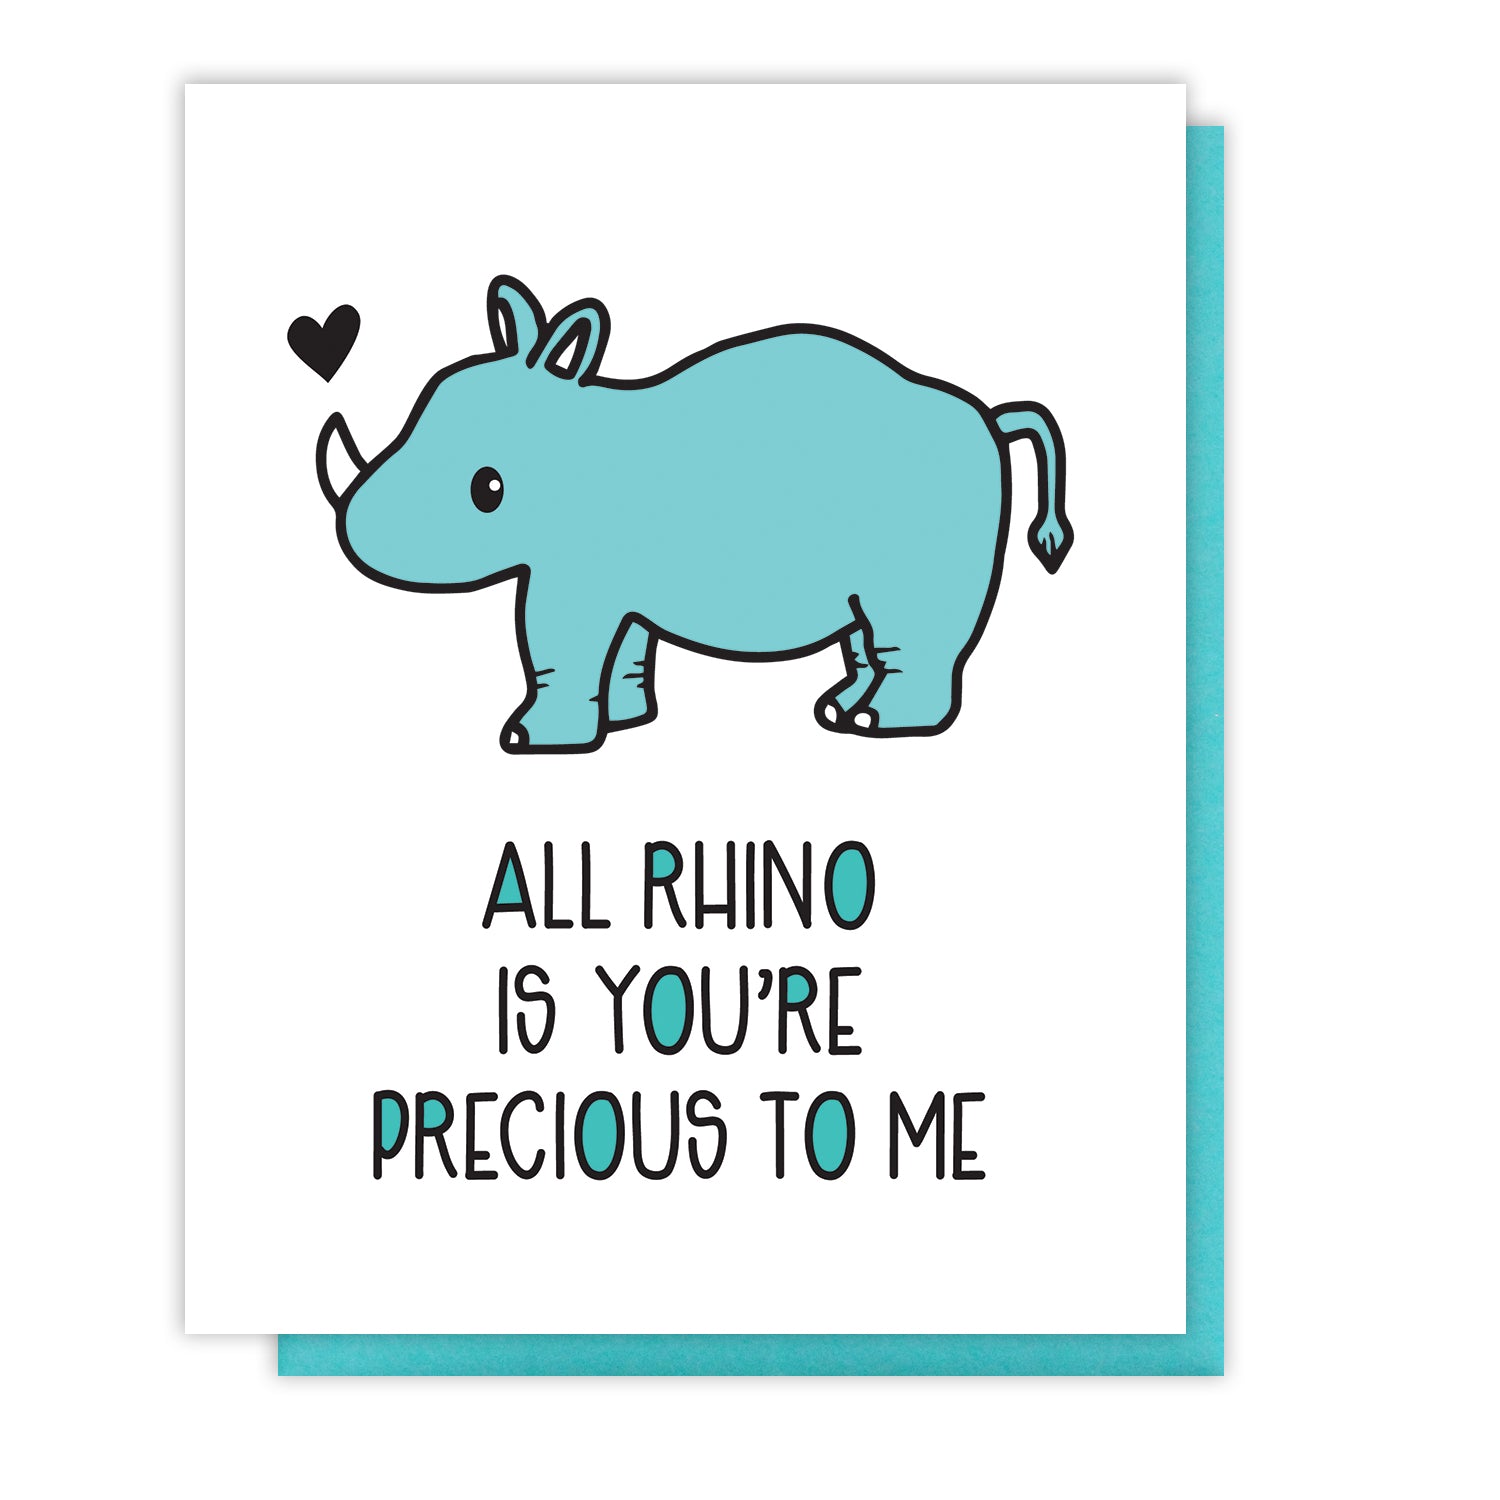 NEW! Cute Rhino Pun Love Friendship Letterpress Card | kiss and punch - Kiss and Punch